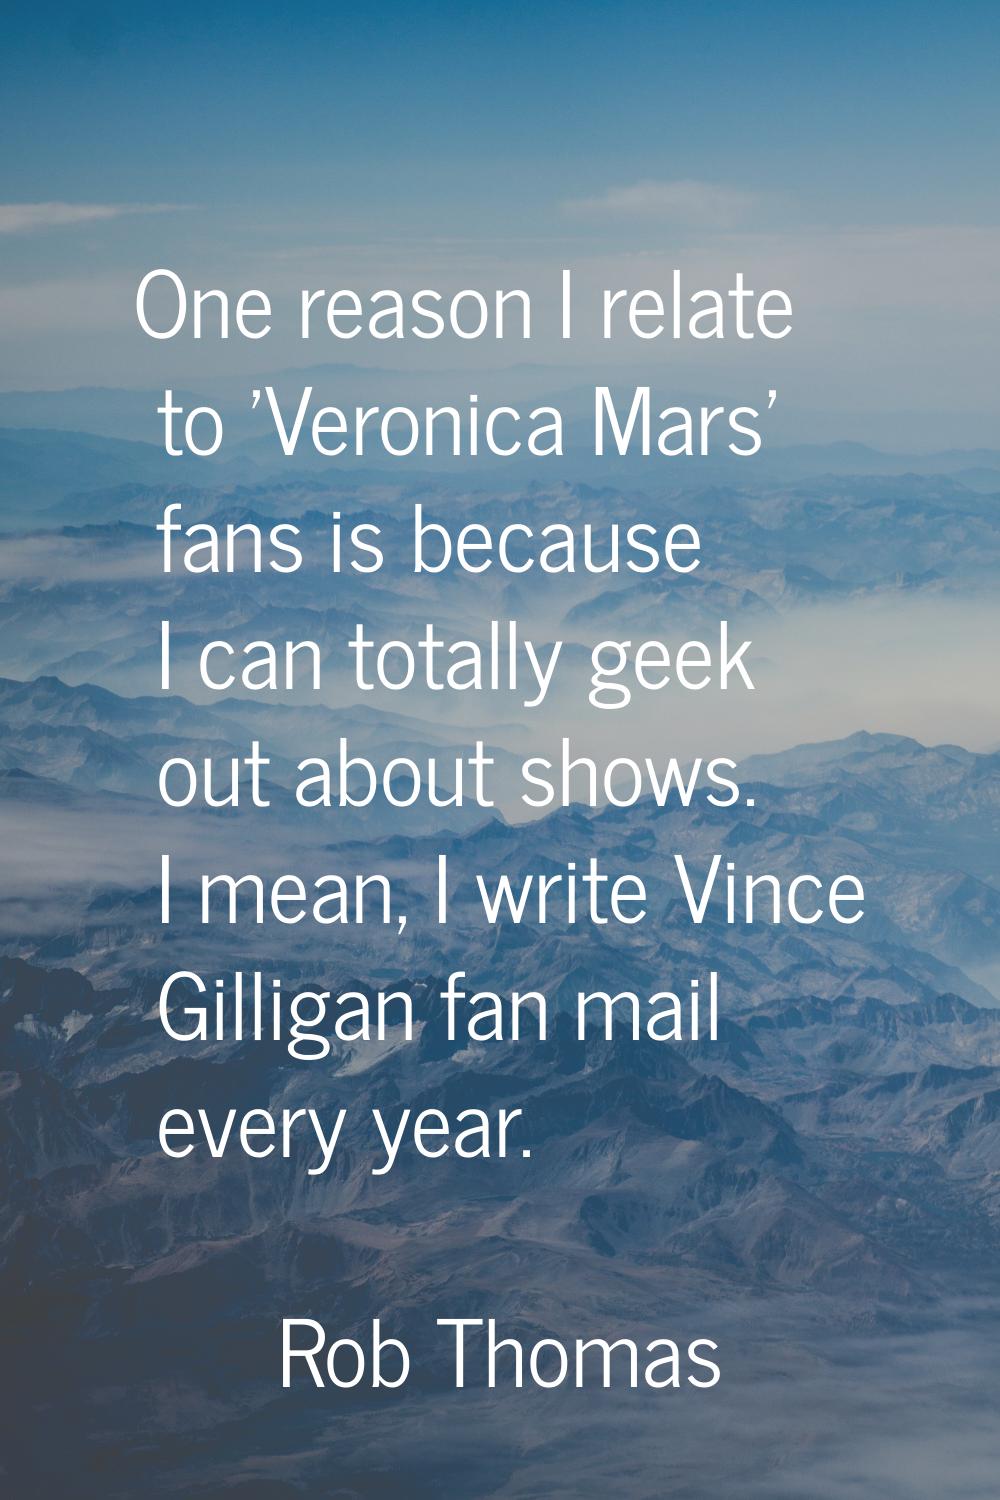 One reason I relate to 'Veronica Mars' fans is because I can totally geek out about shows. I mean, 